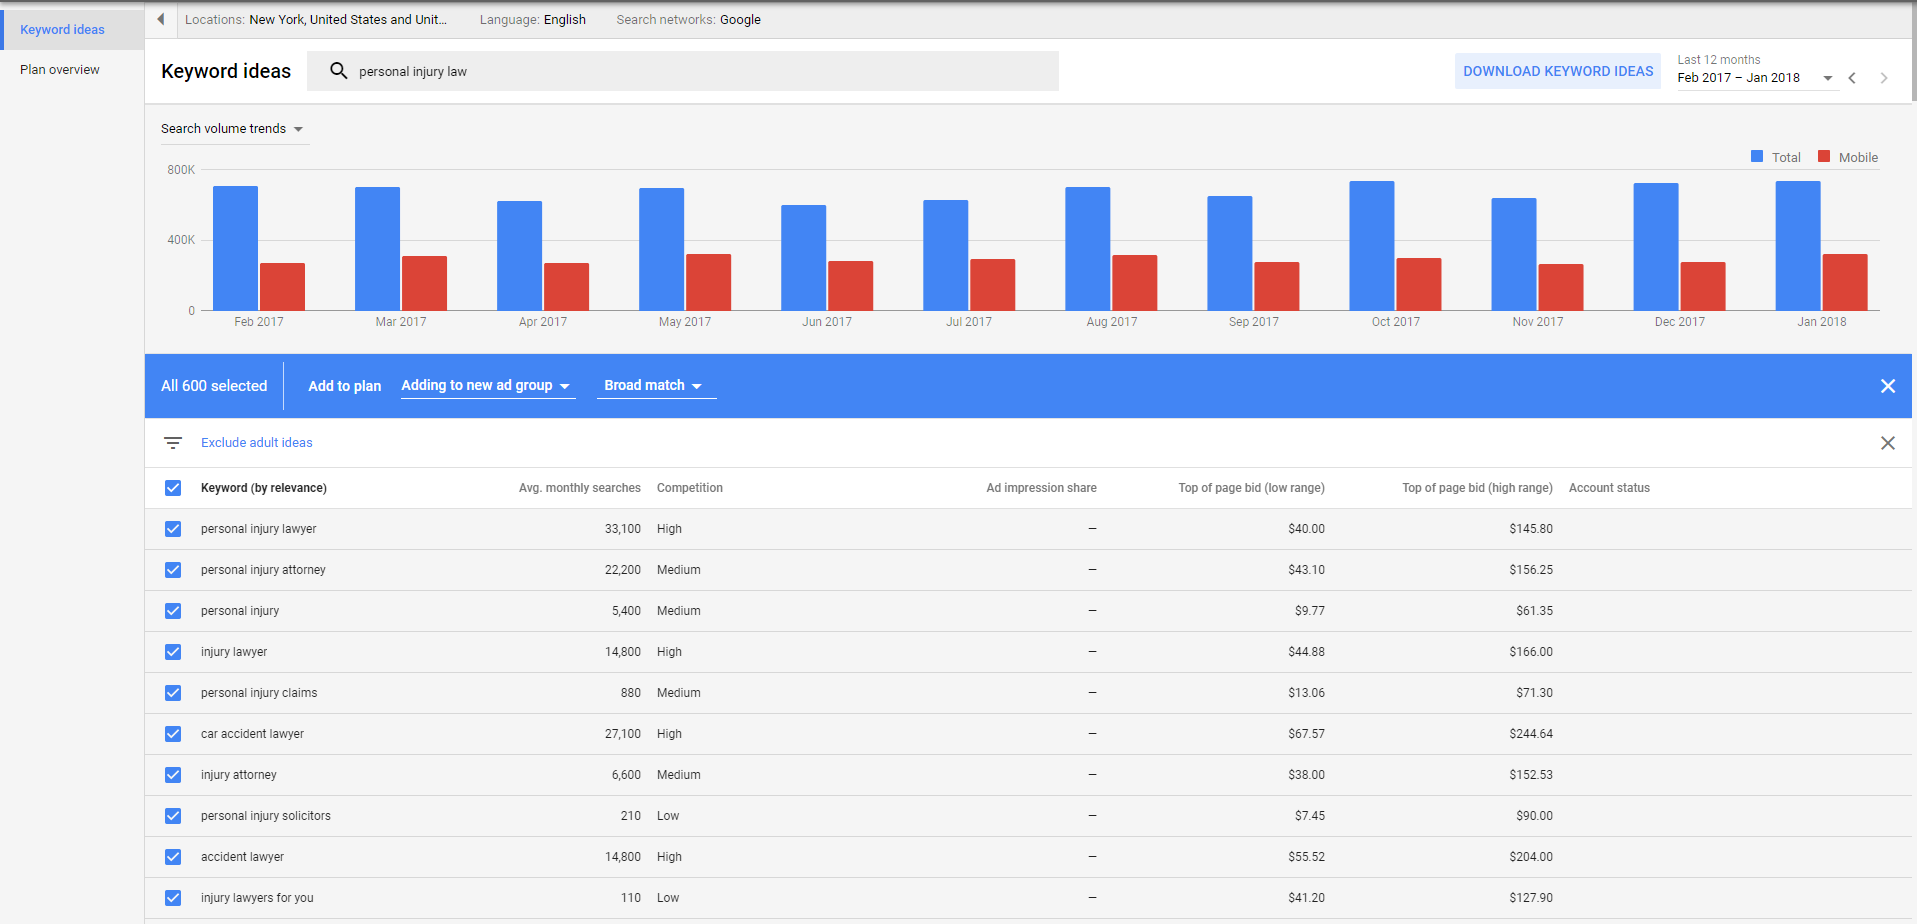 How to Use Google's New Keyword Planner Interface as of March 2018